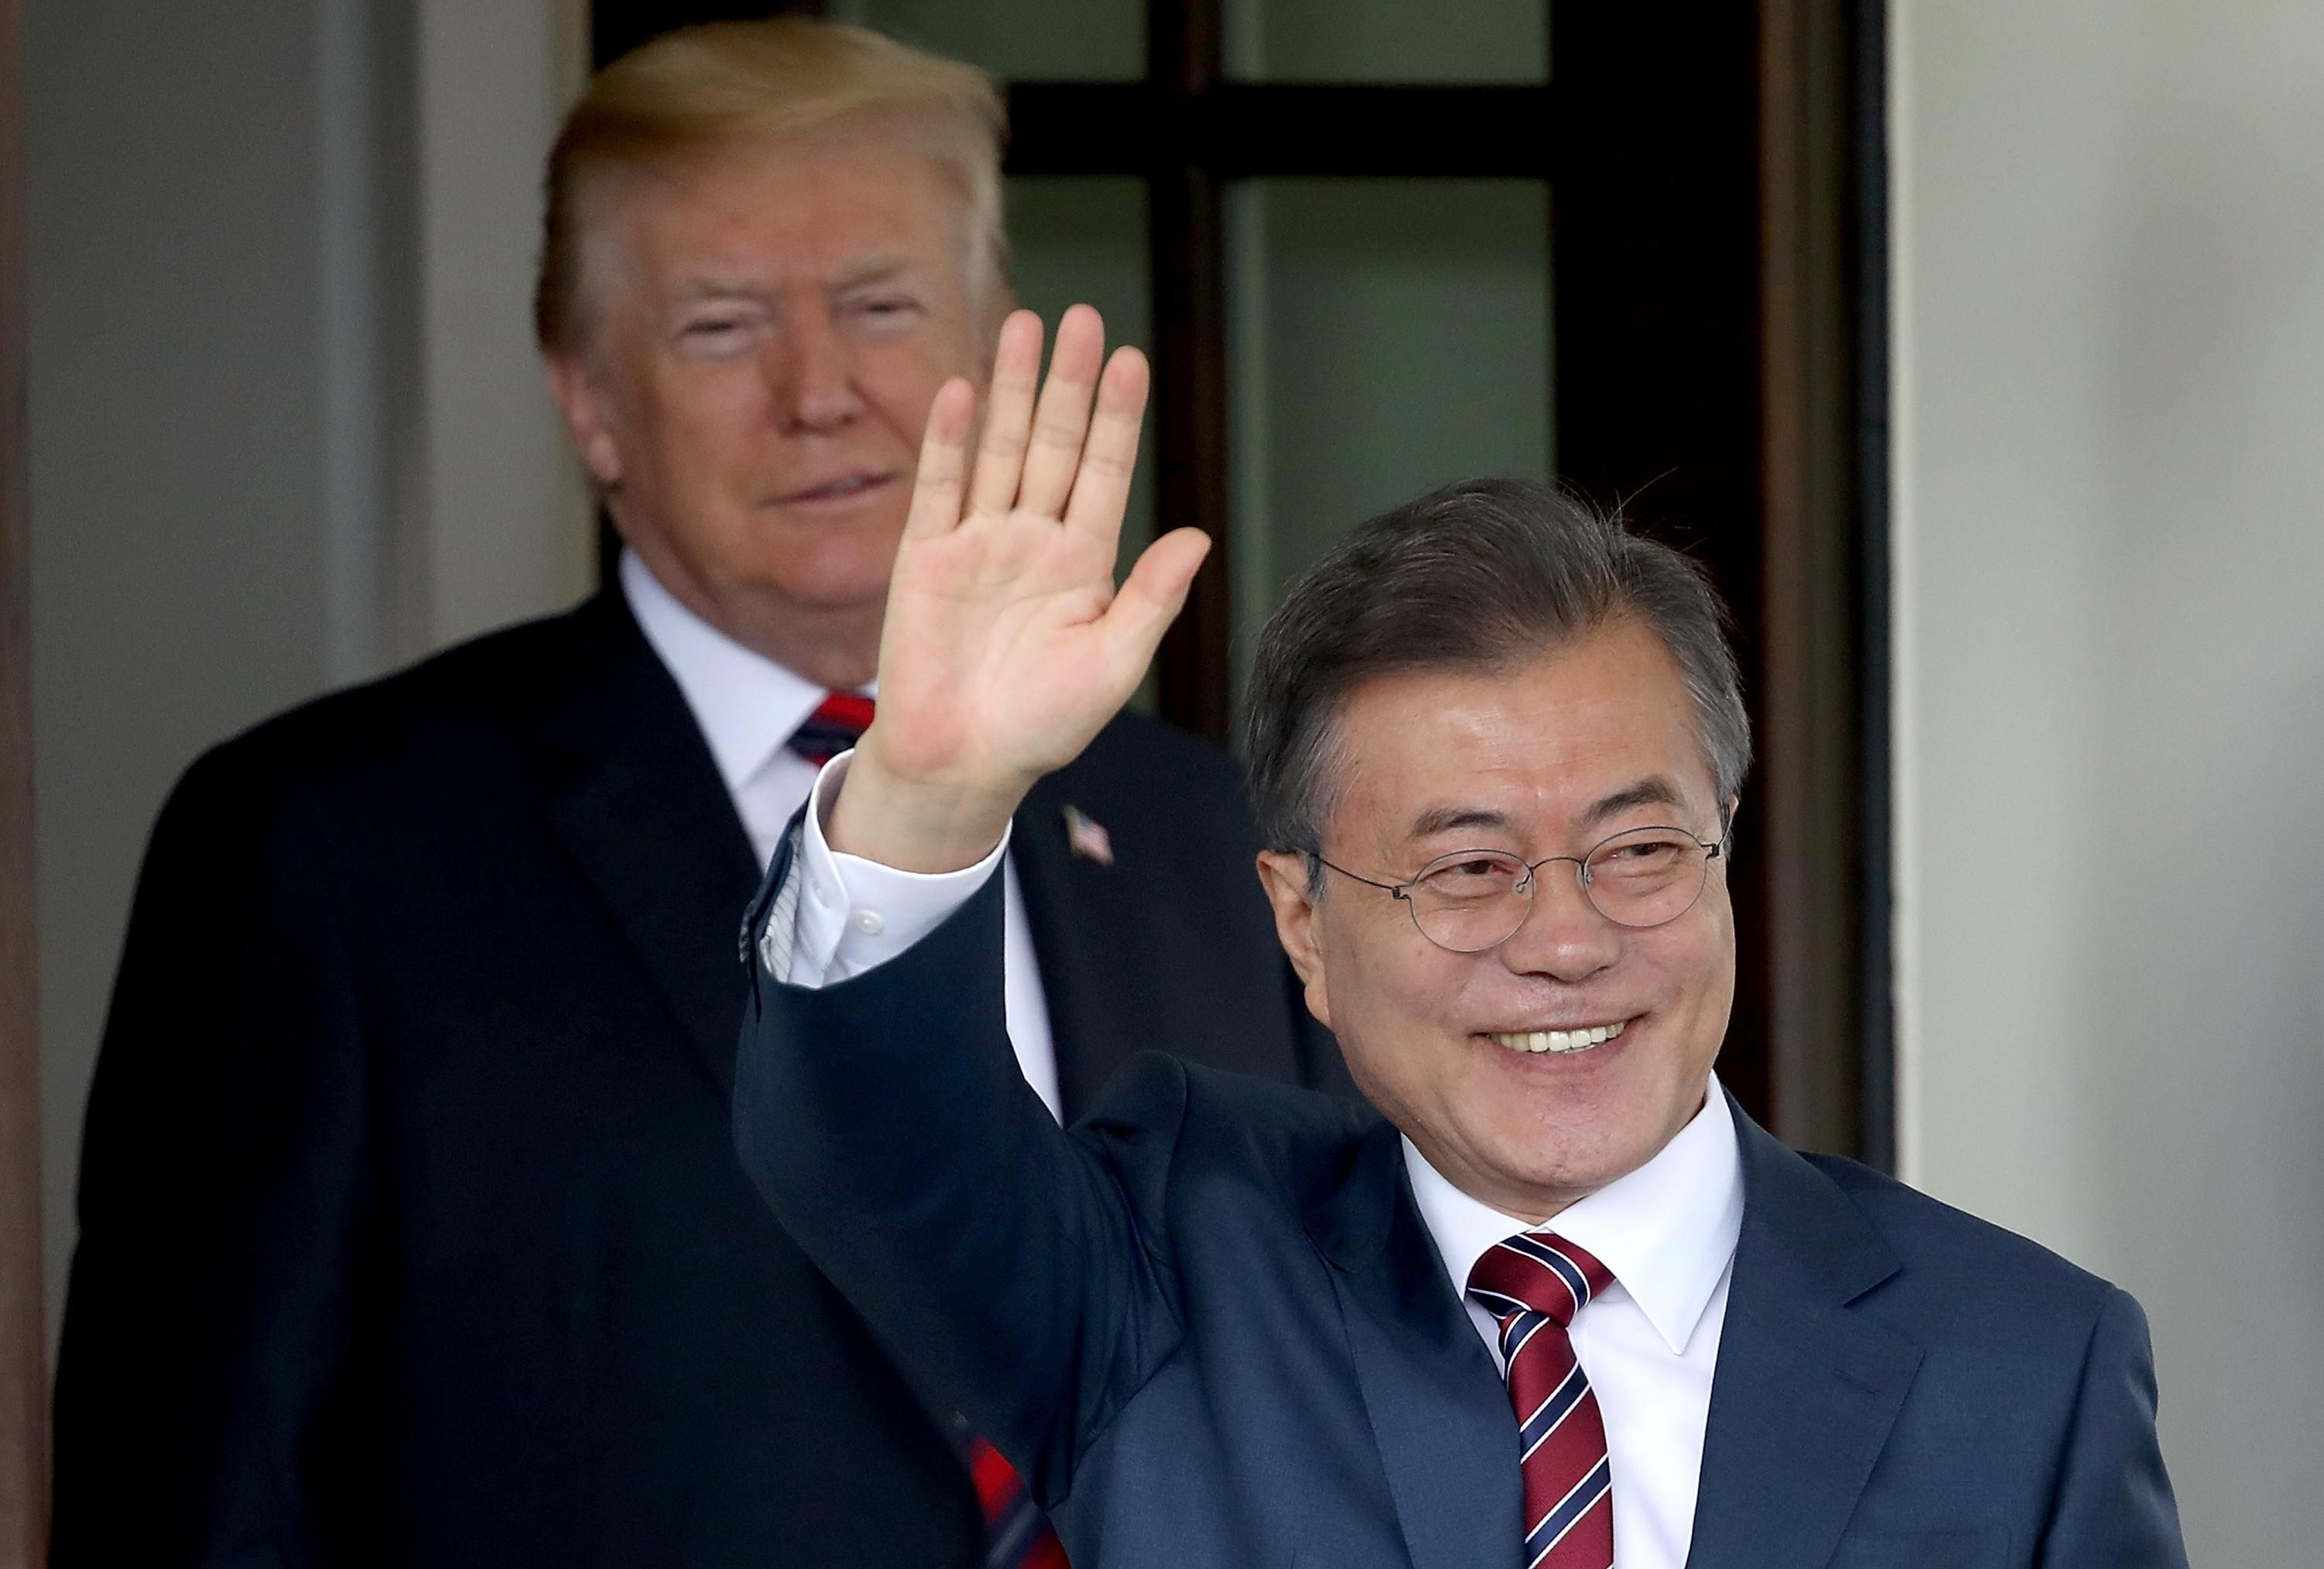 "One would never know it from the mainstream US media, but the president who matters most in this process is not Trump, it’s South Korea’s Moon Jae-in." (Photo by Win McNamee/Getty Images)